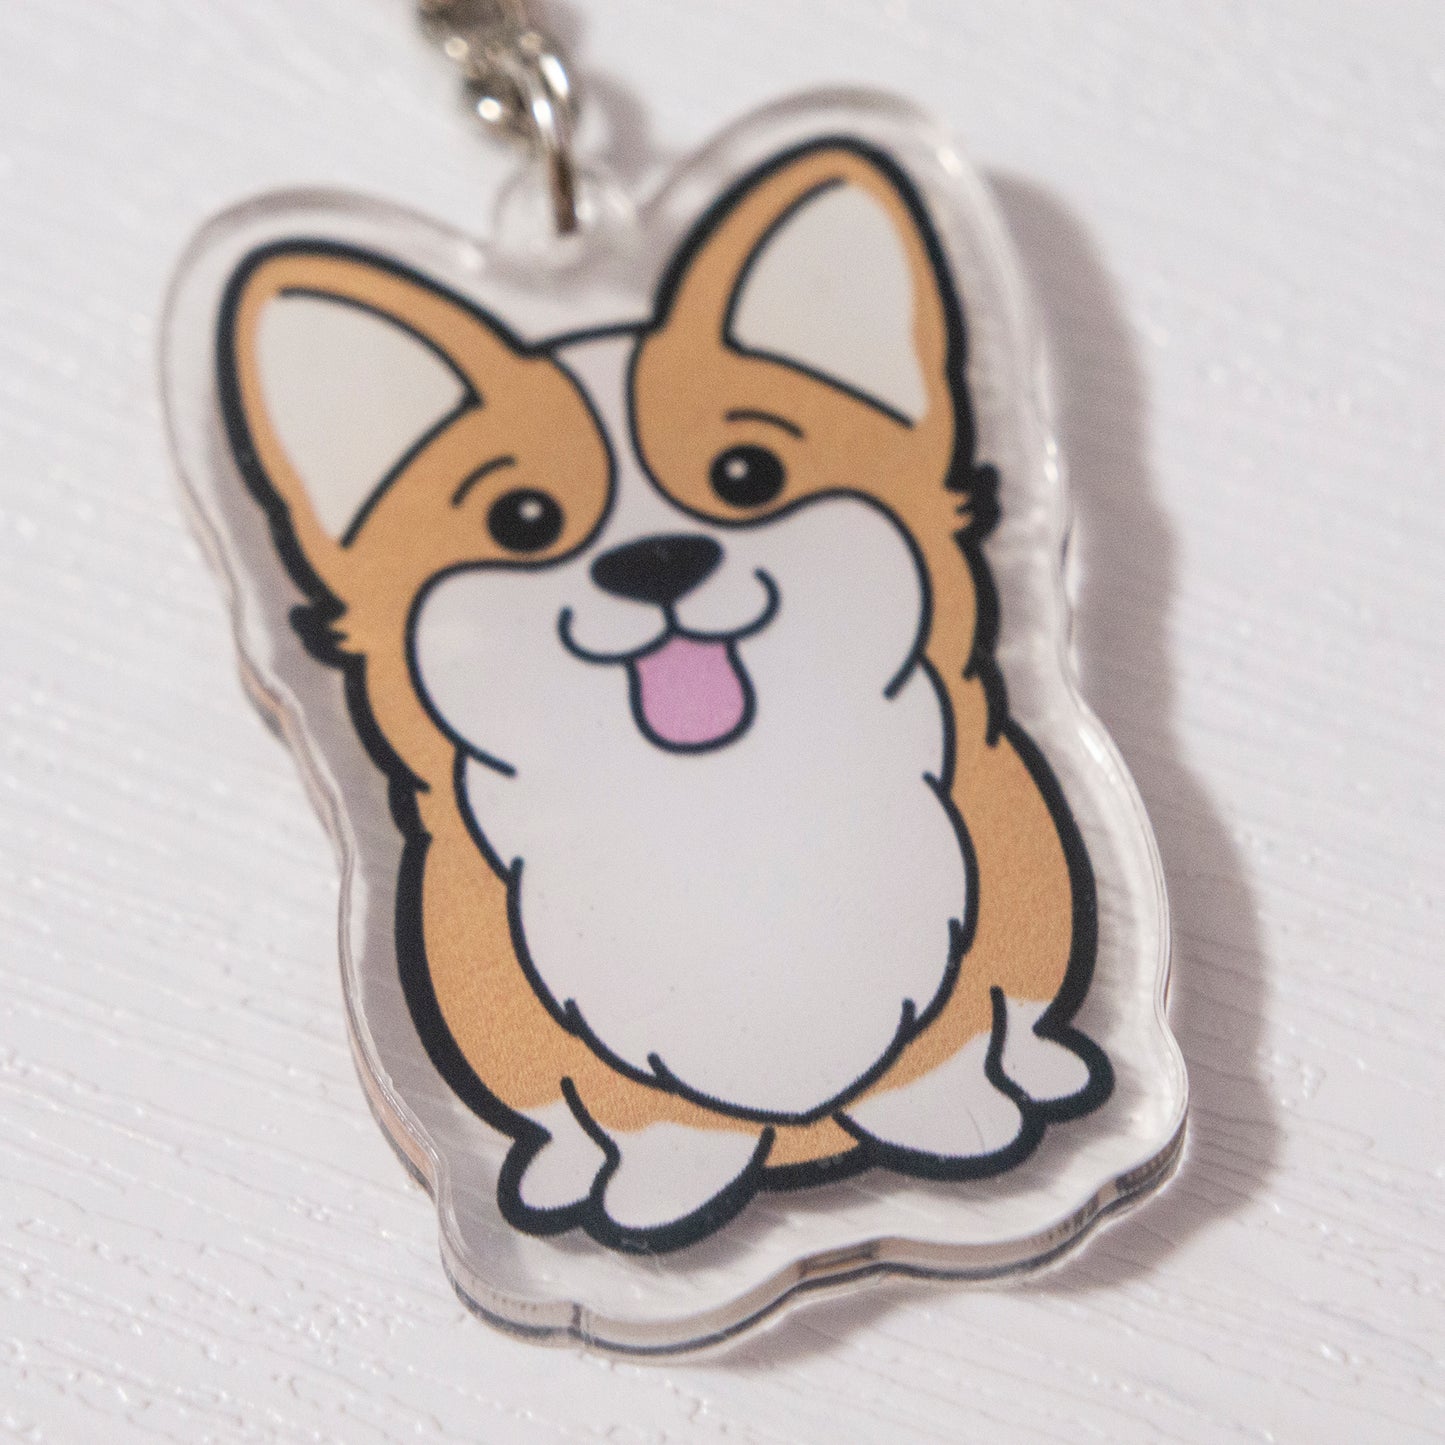 Poodle Poodle Double Sided Keychain Charm